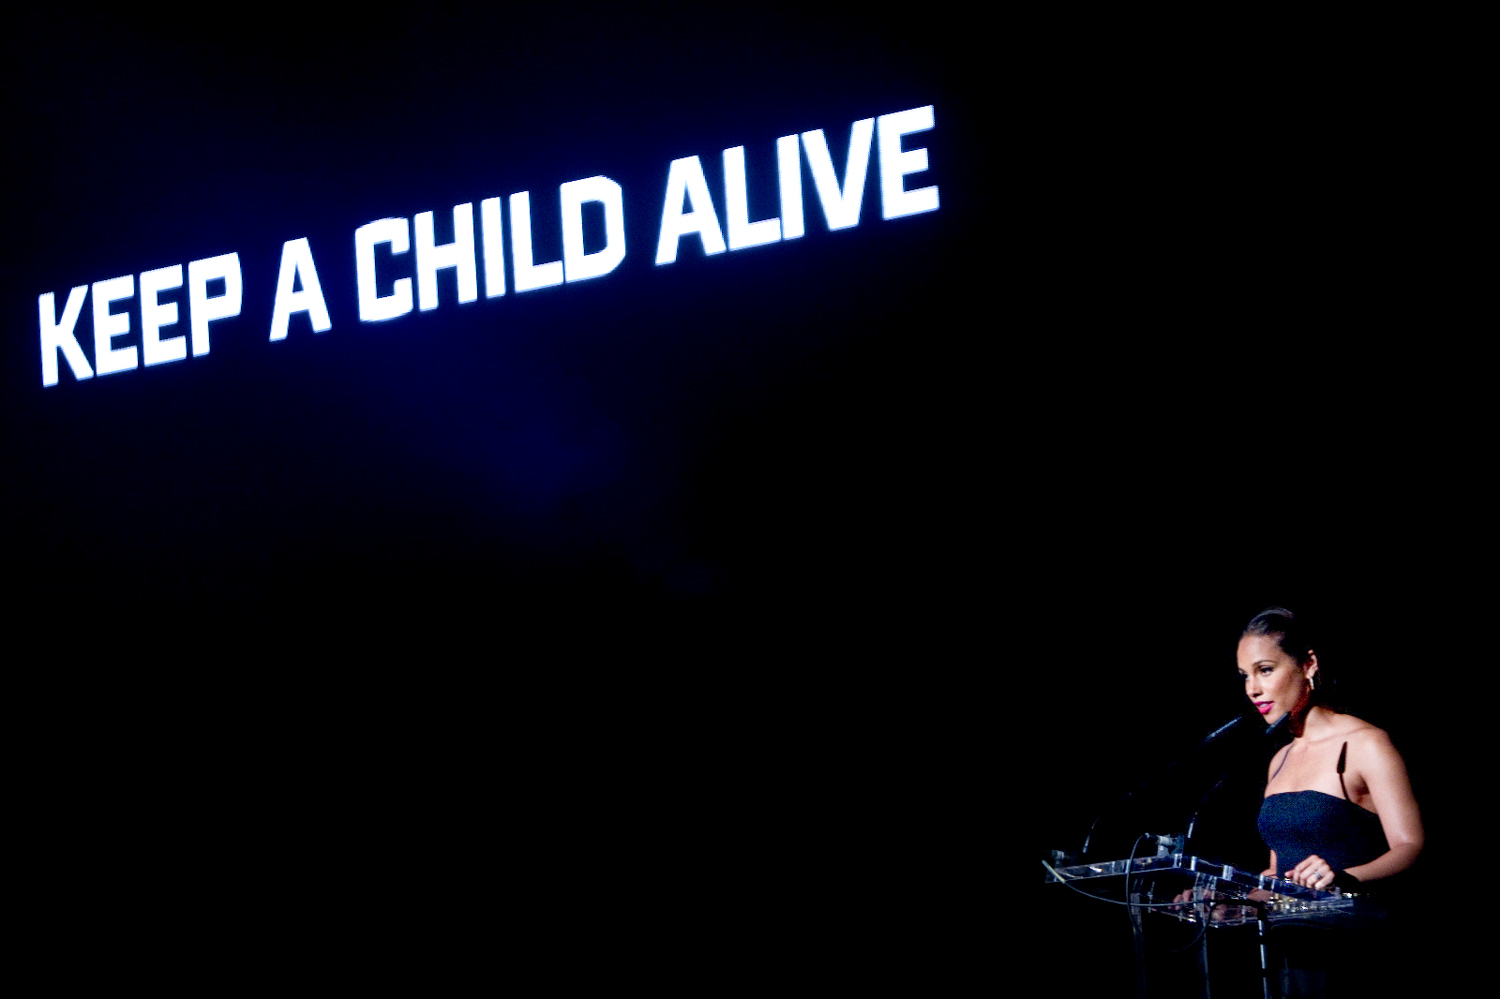 AD Events - Keep a Child Alive